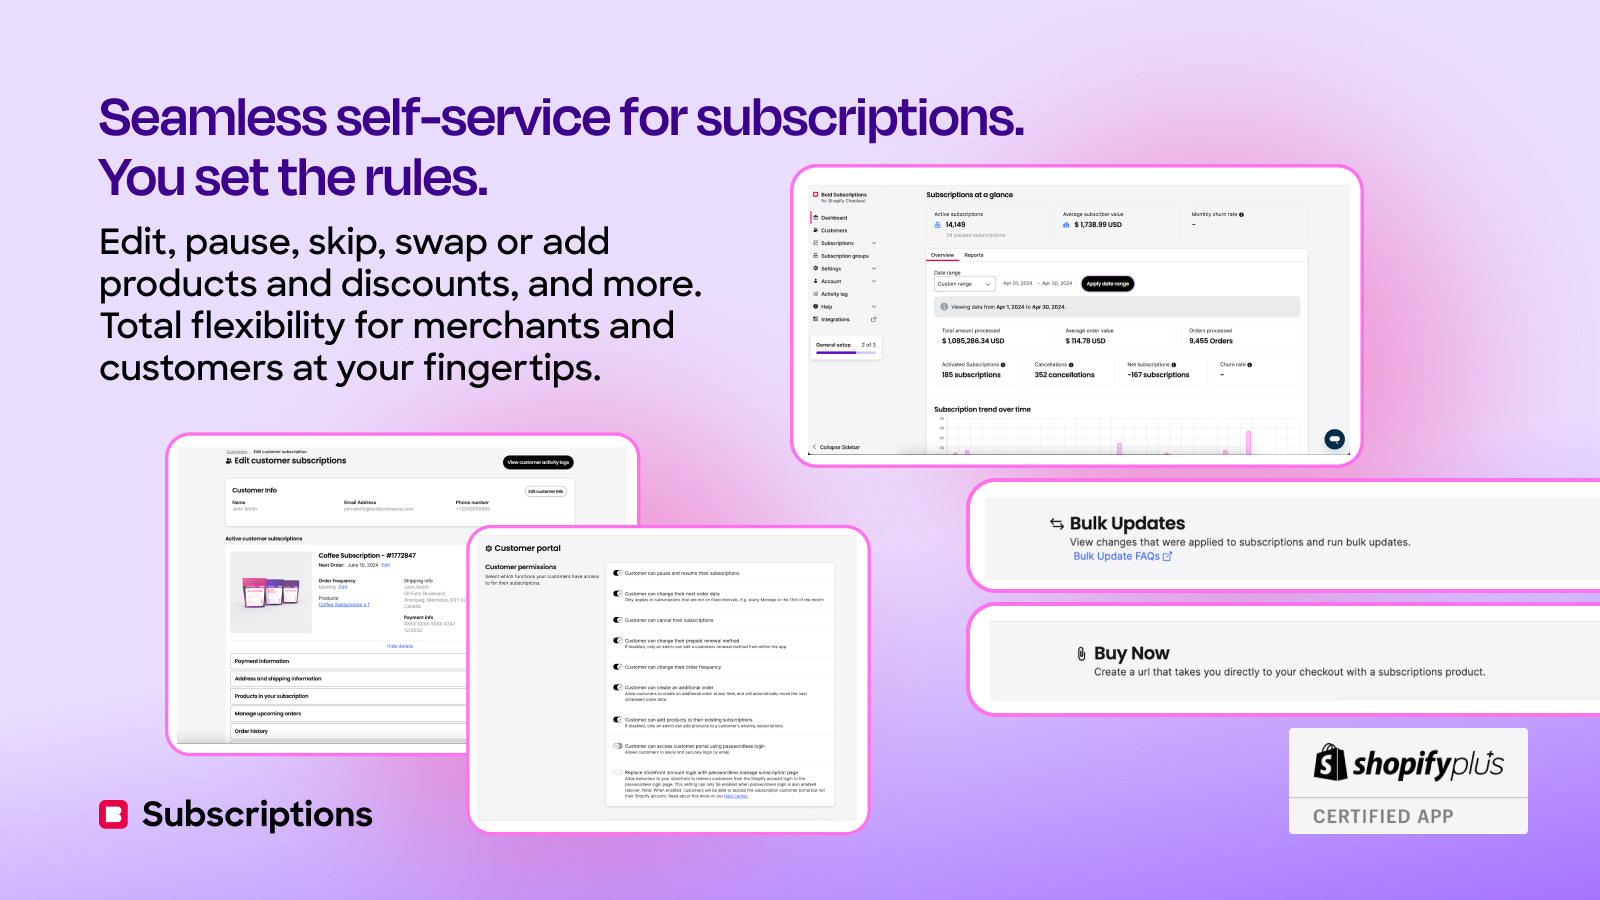 Seamless self-service for subscriptions - you set the rules!